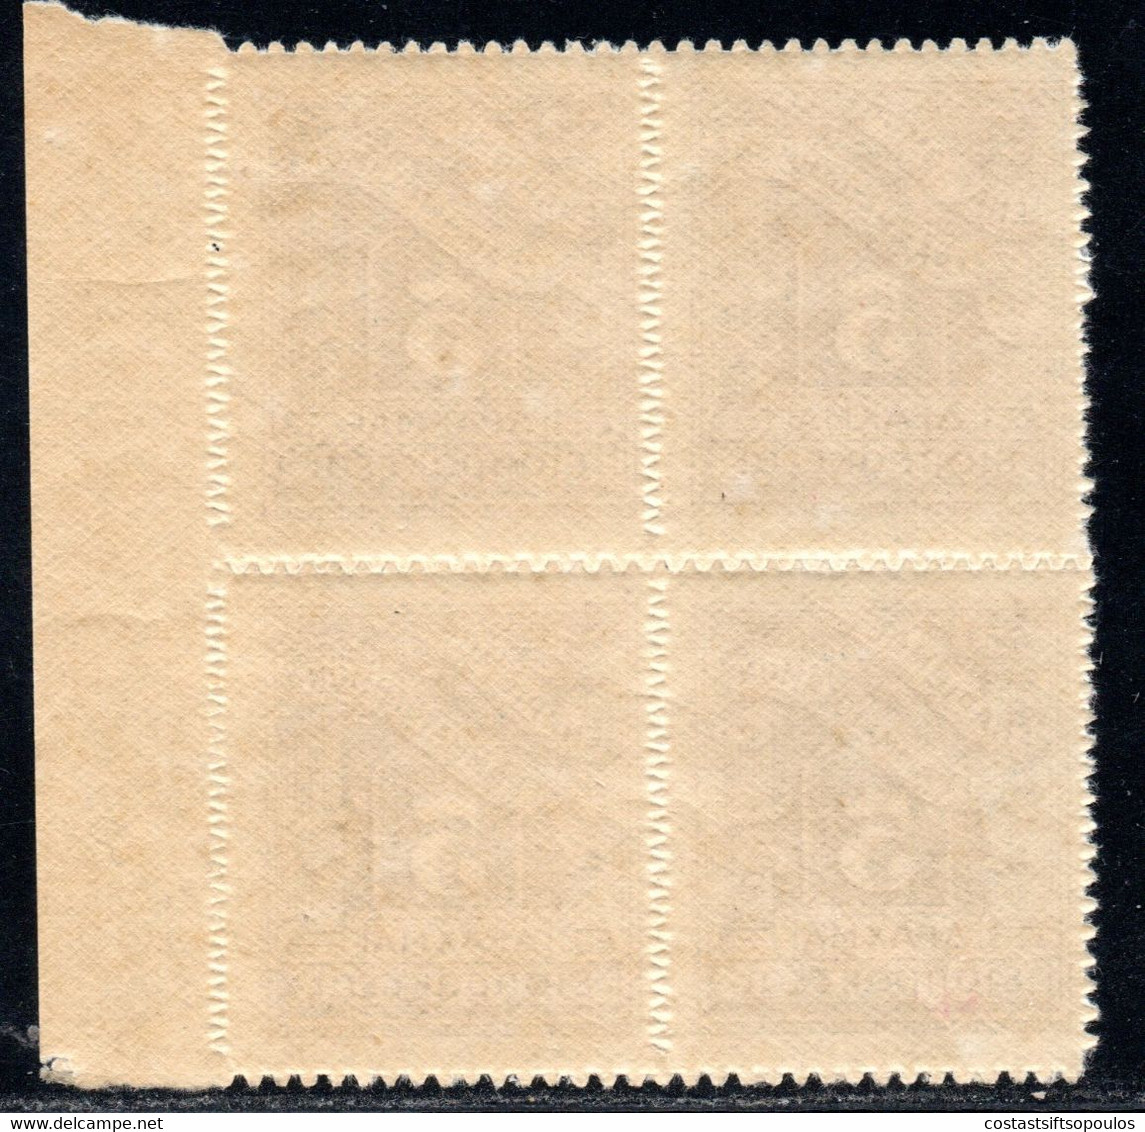 1395. GREECE.1913-1928 POSTAGE DUE. 5 DR. MNH BLOCK OF 4  VERY FINE AND FRESH. - Ungebraucht